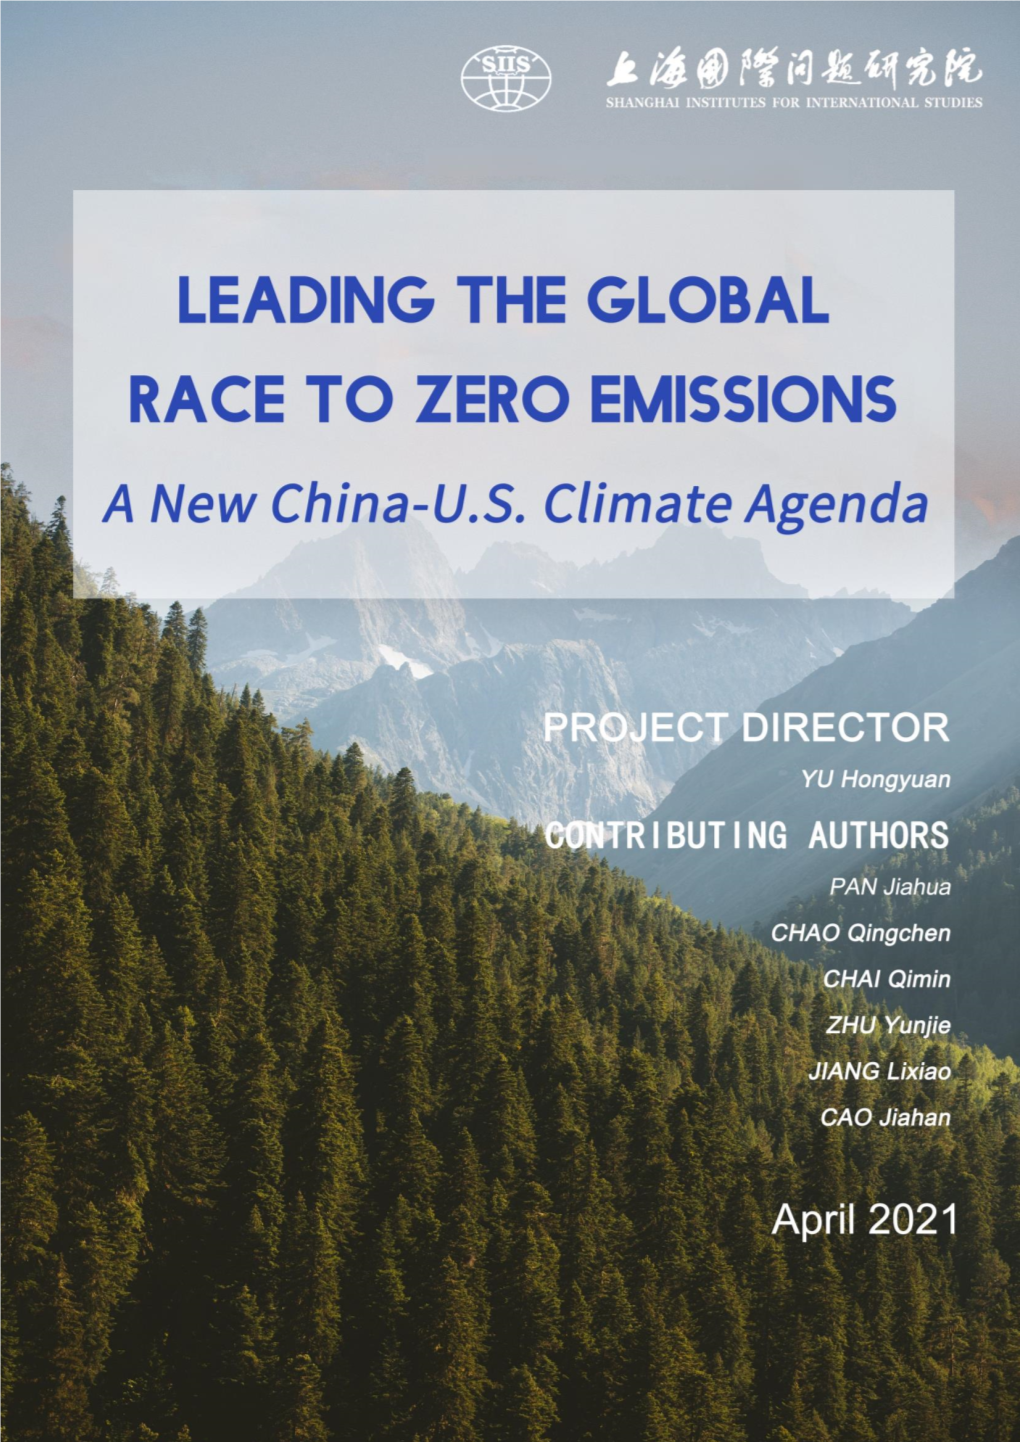 Leading the Global Race to Zero Emissions a New China-U.S. Climate Agenda